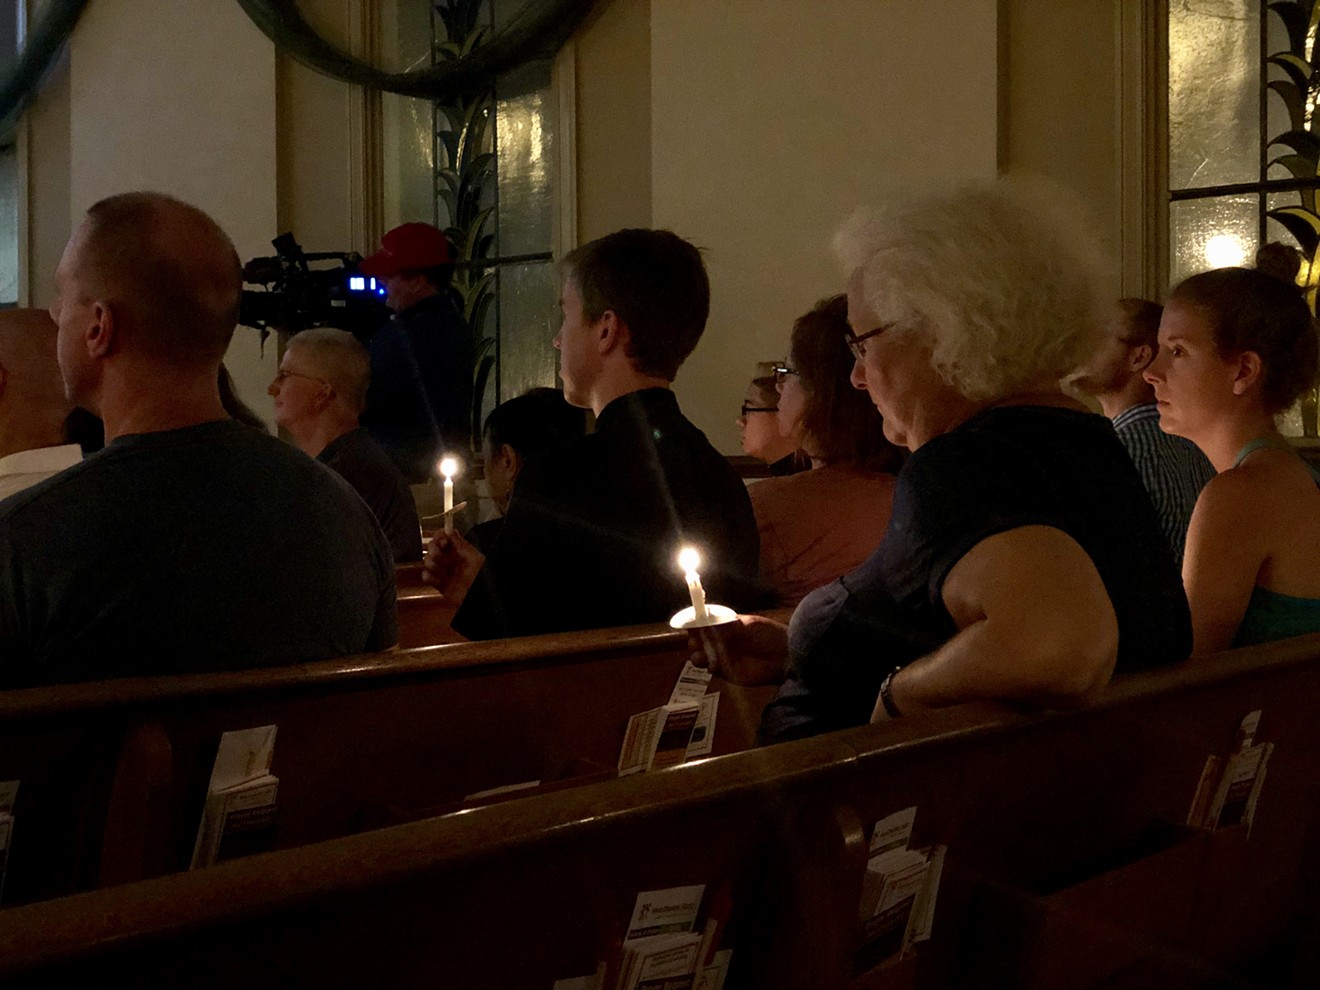 People gather at an interfaith vigil for the victims of the El Paso, Texas, and Dayton, Ohio shootings, which killed at least 29 people this weekend.